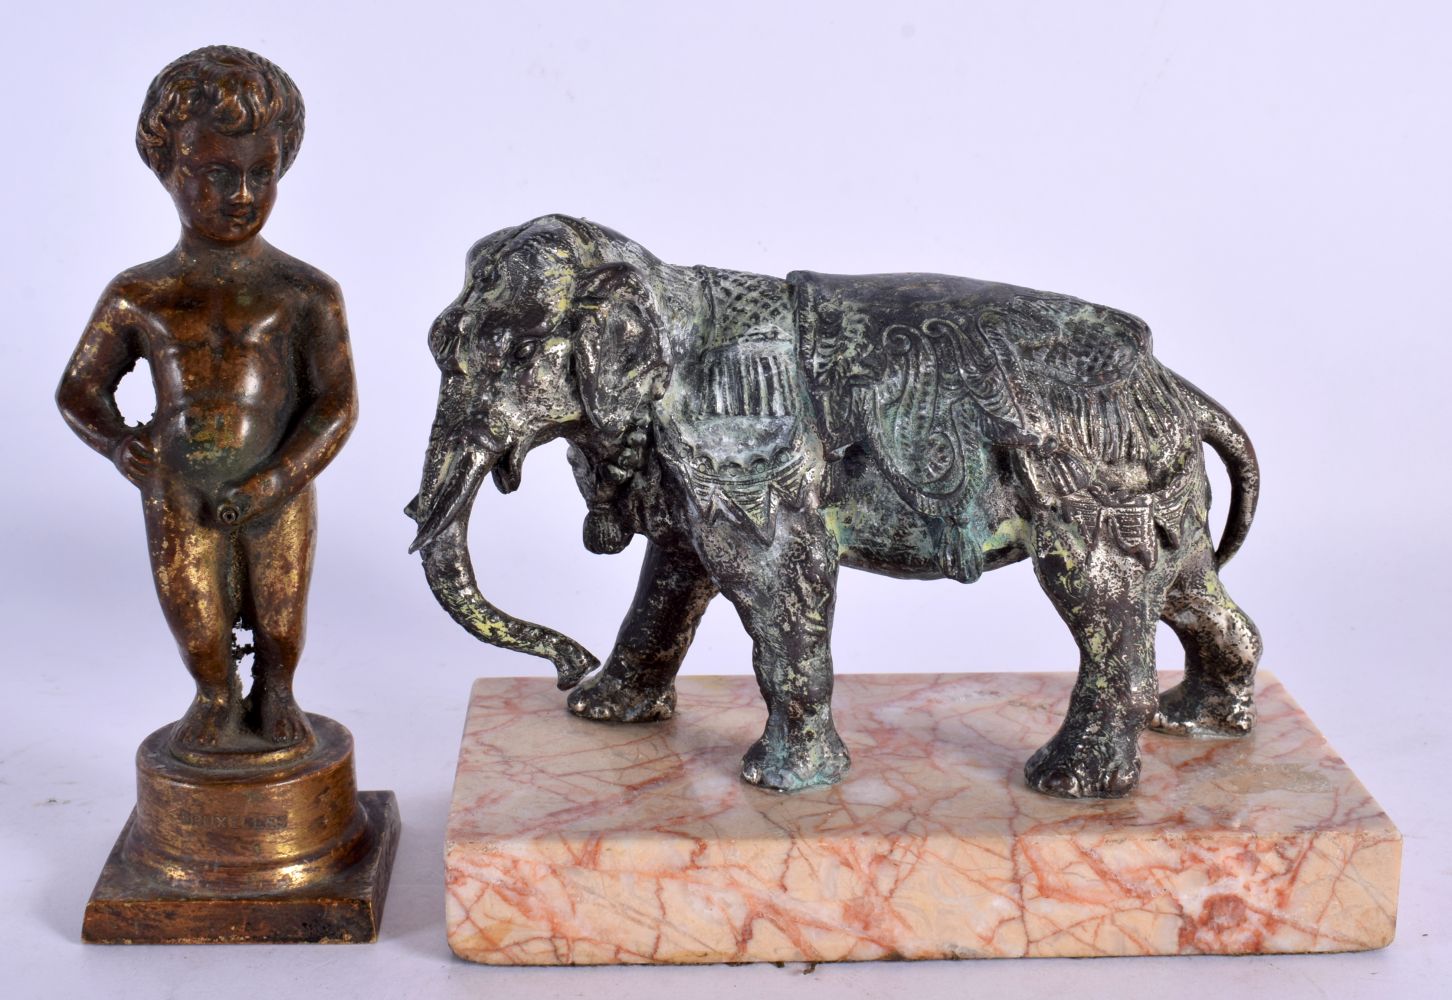 AN ANTIQUE BELGIAN BRONZE FIGURE OF A NUDE BOY together with 1920 Indian figure of an elephant. Larg